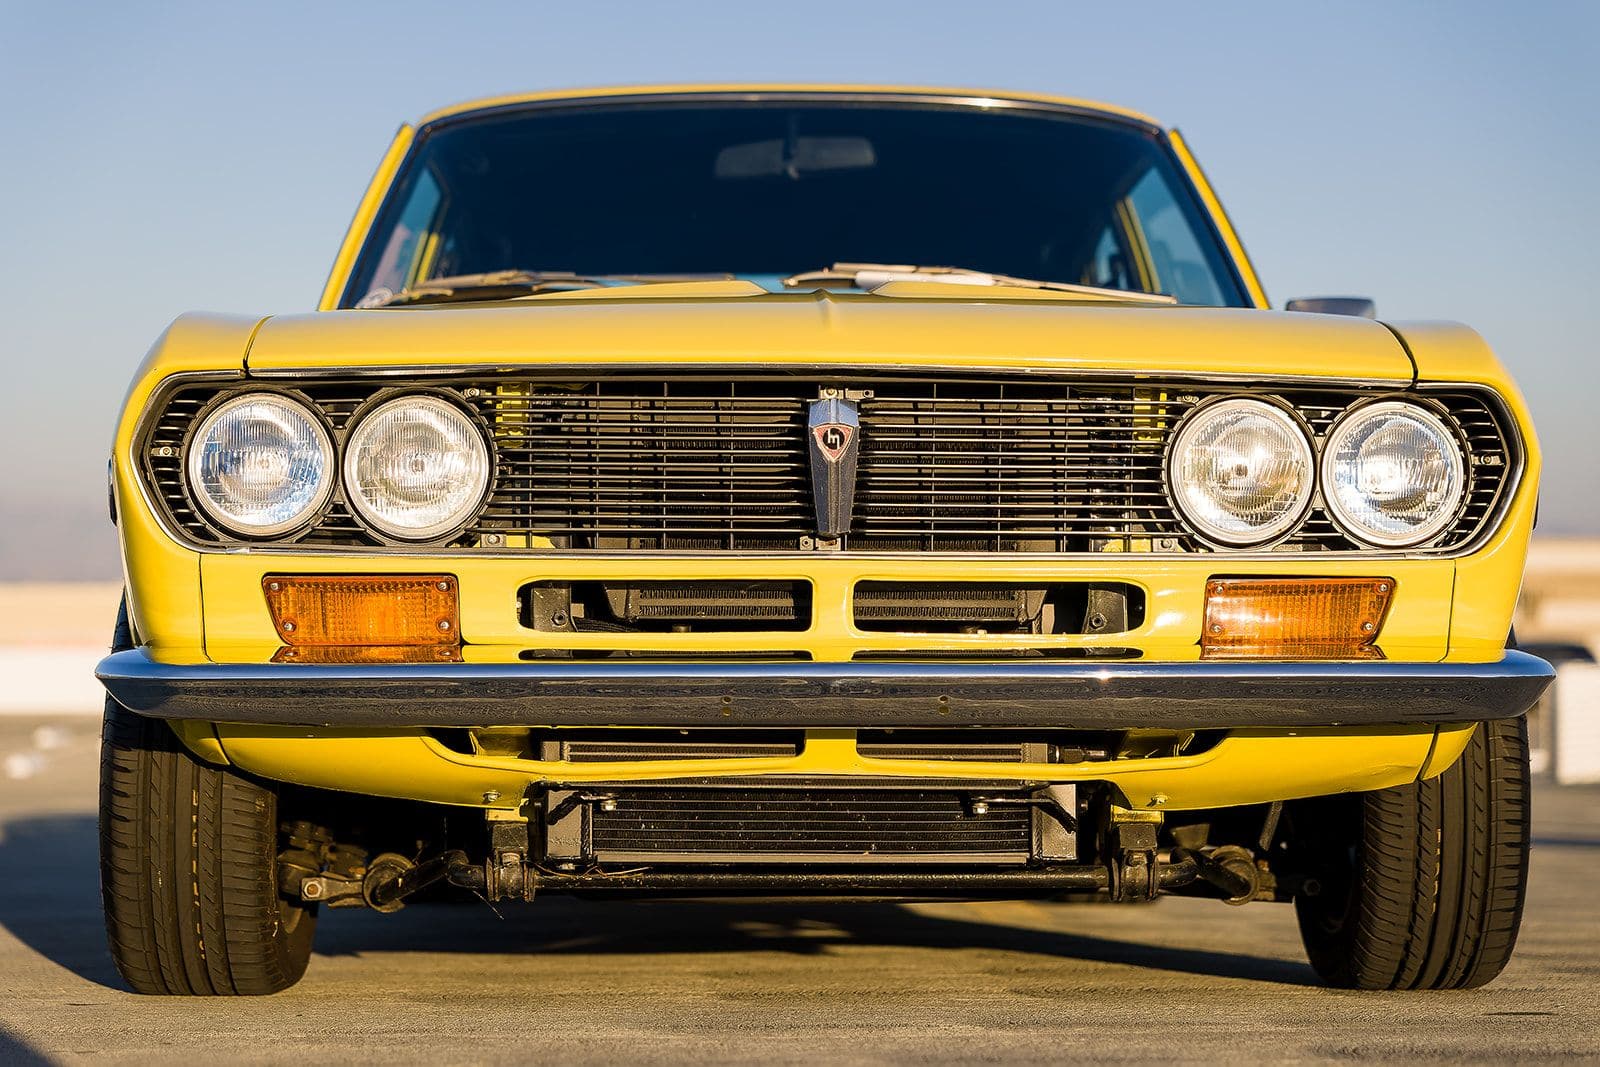 1973 Mazda RX-2 - WTT Turbo Rx2 for an FD Rx7 - Used - VIN S122A139976 - 80,000 Miles - Other - 2WD - Manual - Sedan - Yellow - San Jose, CA 95112, United States